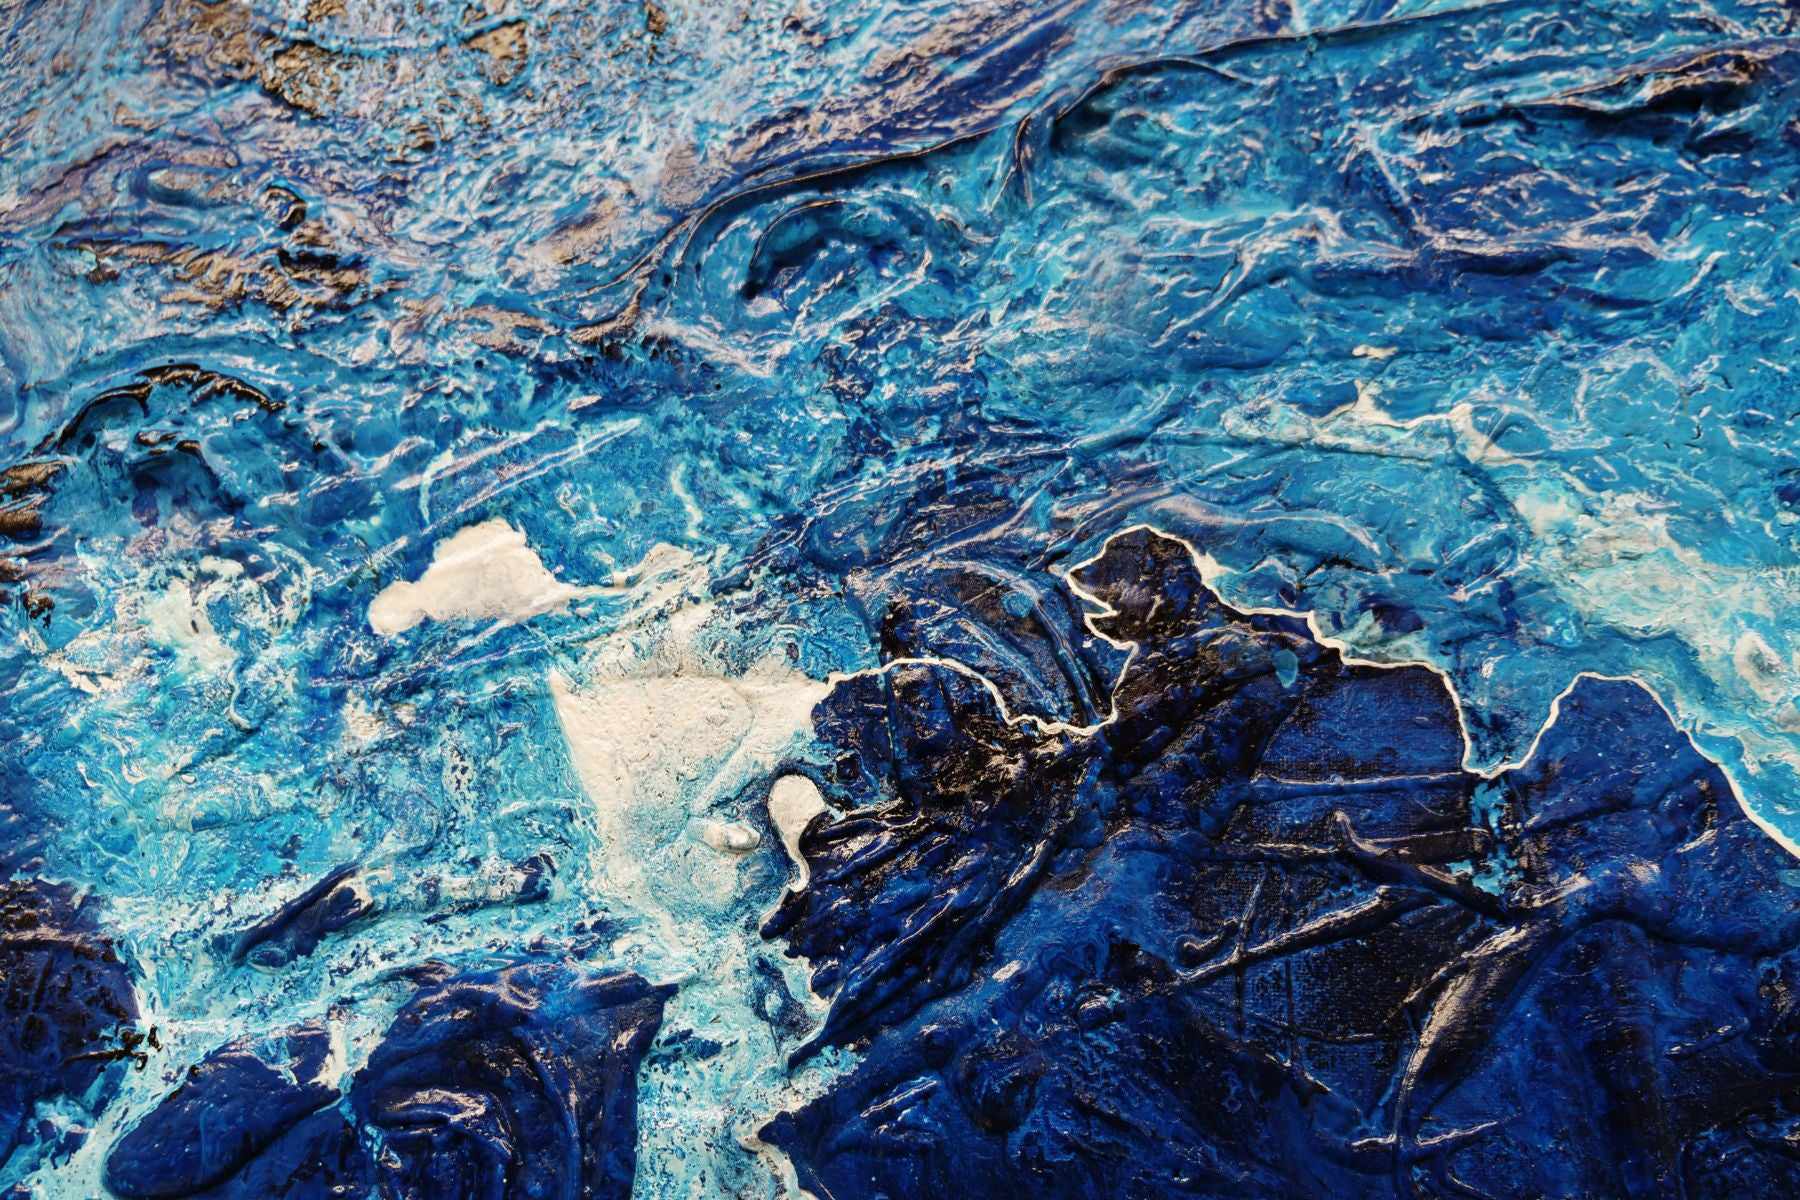 Sapphire Seas 240cm x 100cm Blue White Textured Abstract Painting (SOLD)